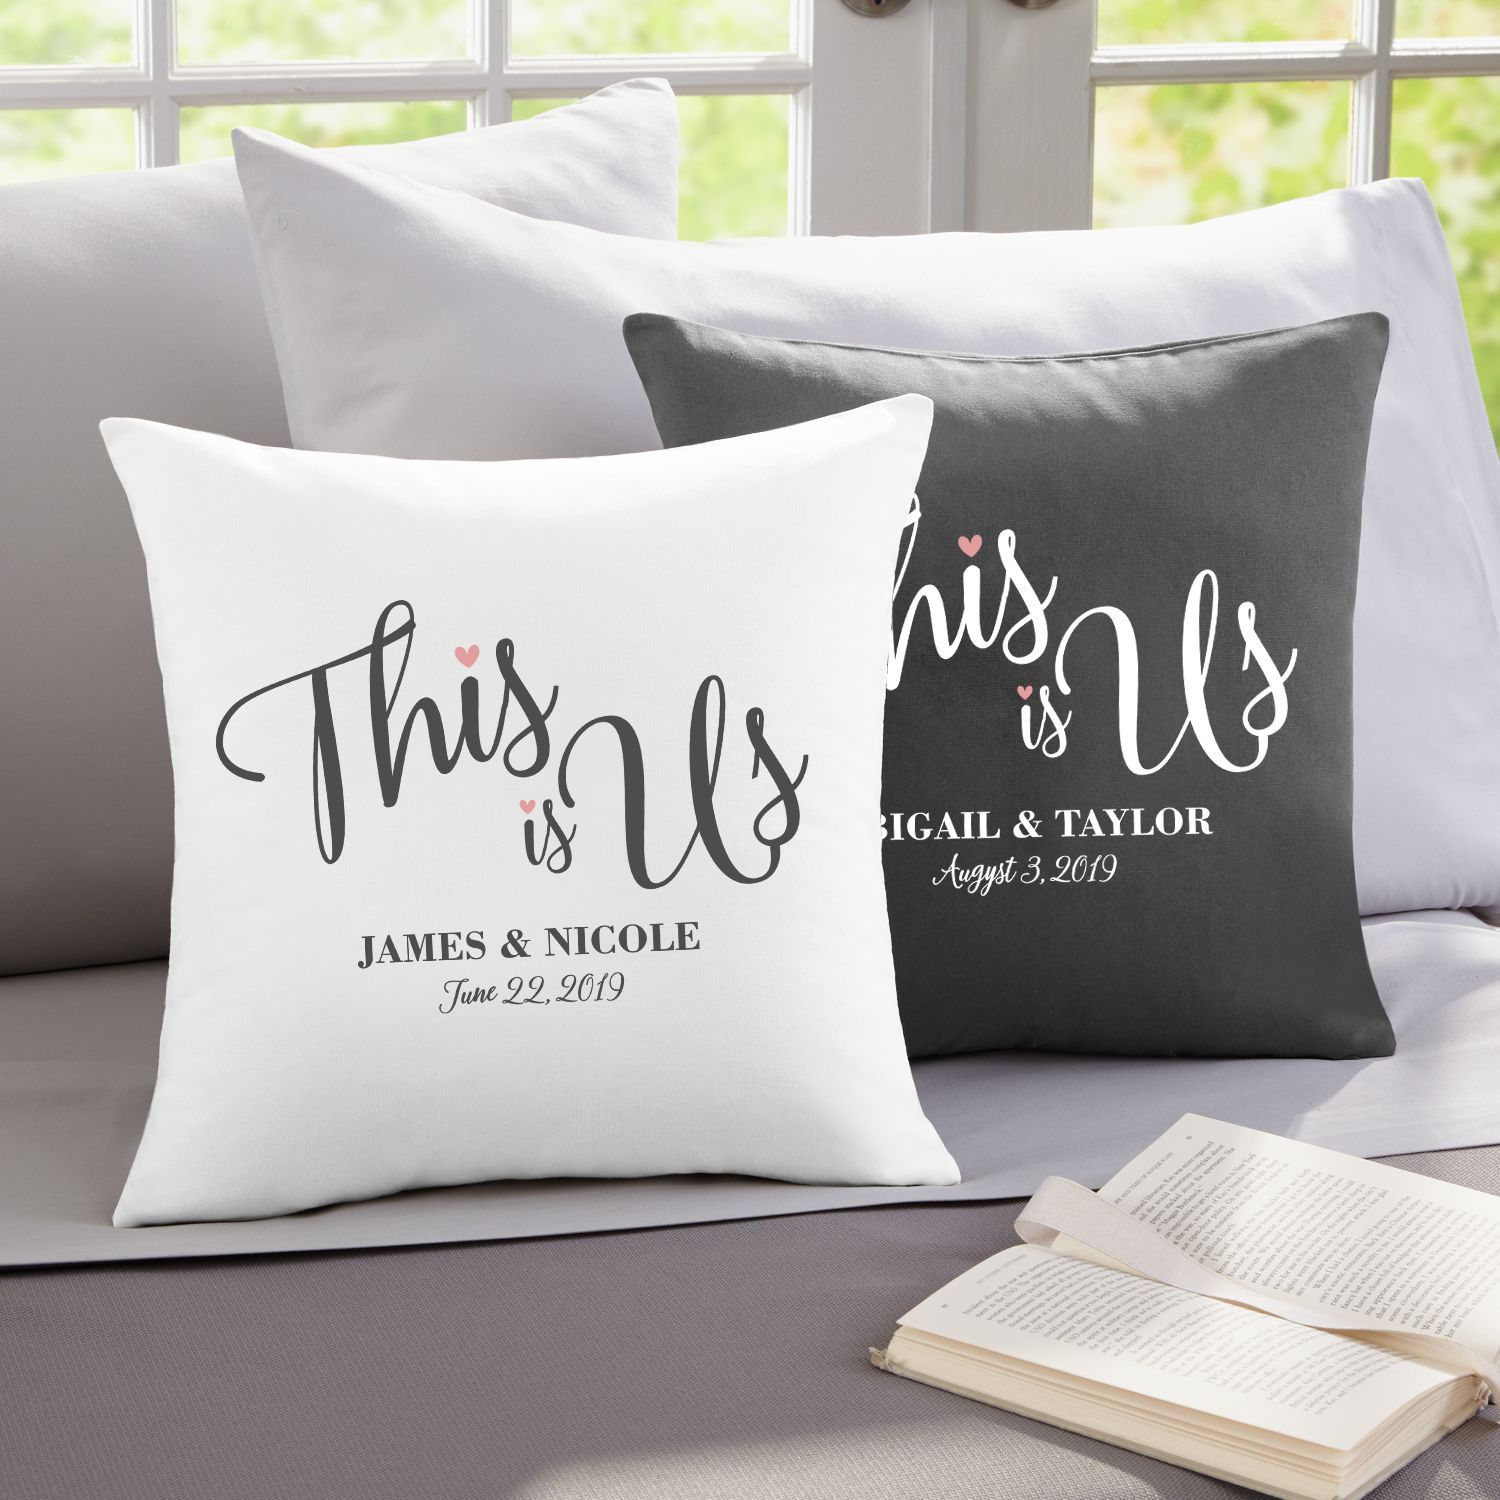 Personalized This is Us Wedding Throw Pillow - White - Walmart.com - Personalized This is Us Wedding Throw Pillow - White - Walmart.com -   18 diy Pillows cricut ideas